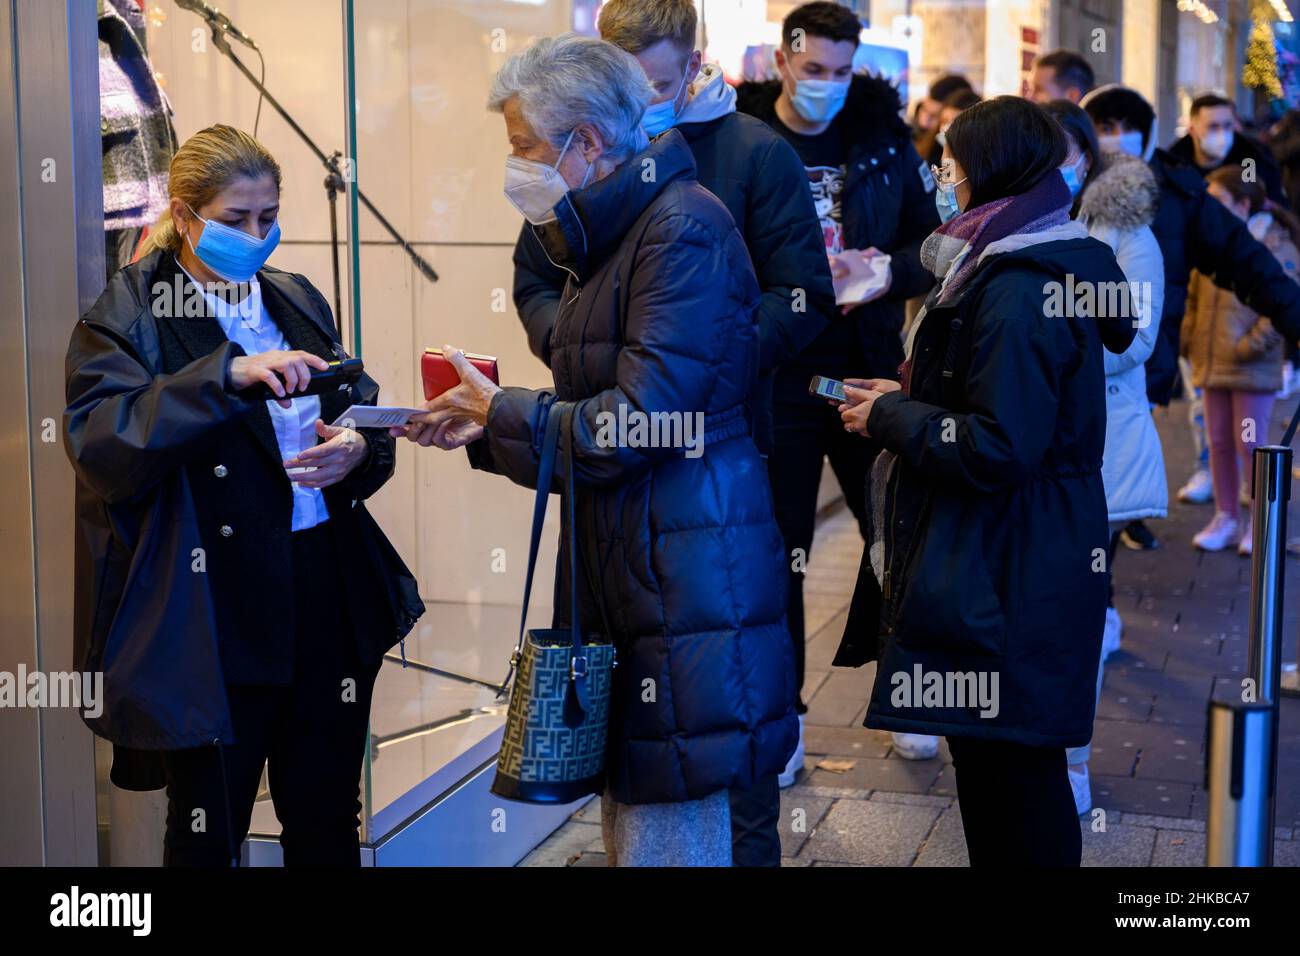 Vaccination passports are checked at the entrance to a fashion boutique in the city centre of Düsseldorf, NRW, Germany on 11.12.2021 Stock Photo